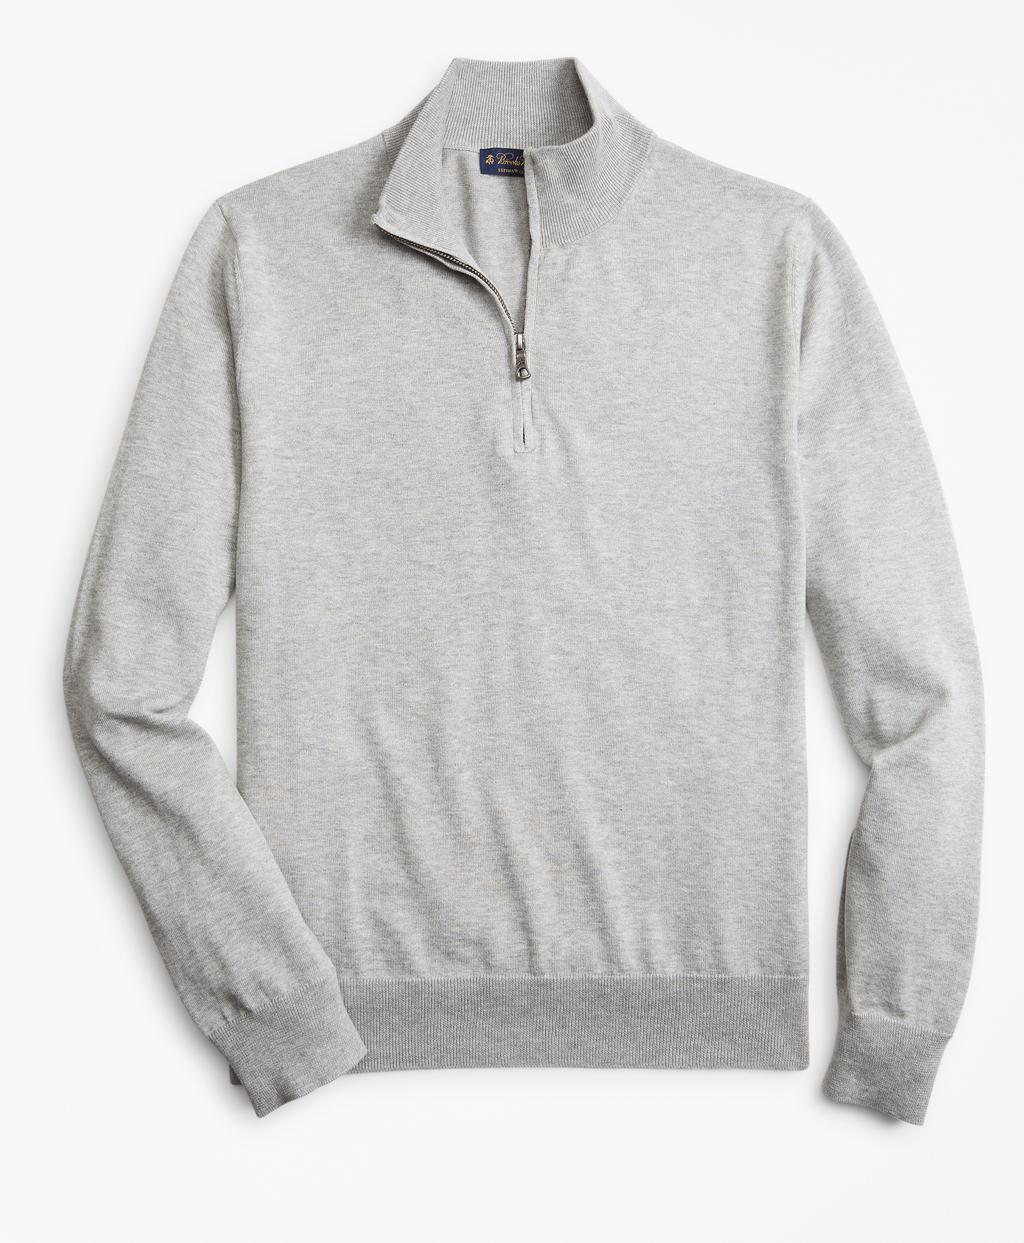 Brooks Brothers Supima Cotton Half-zip Sweater in Gray for Men - Save 8 ...